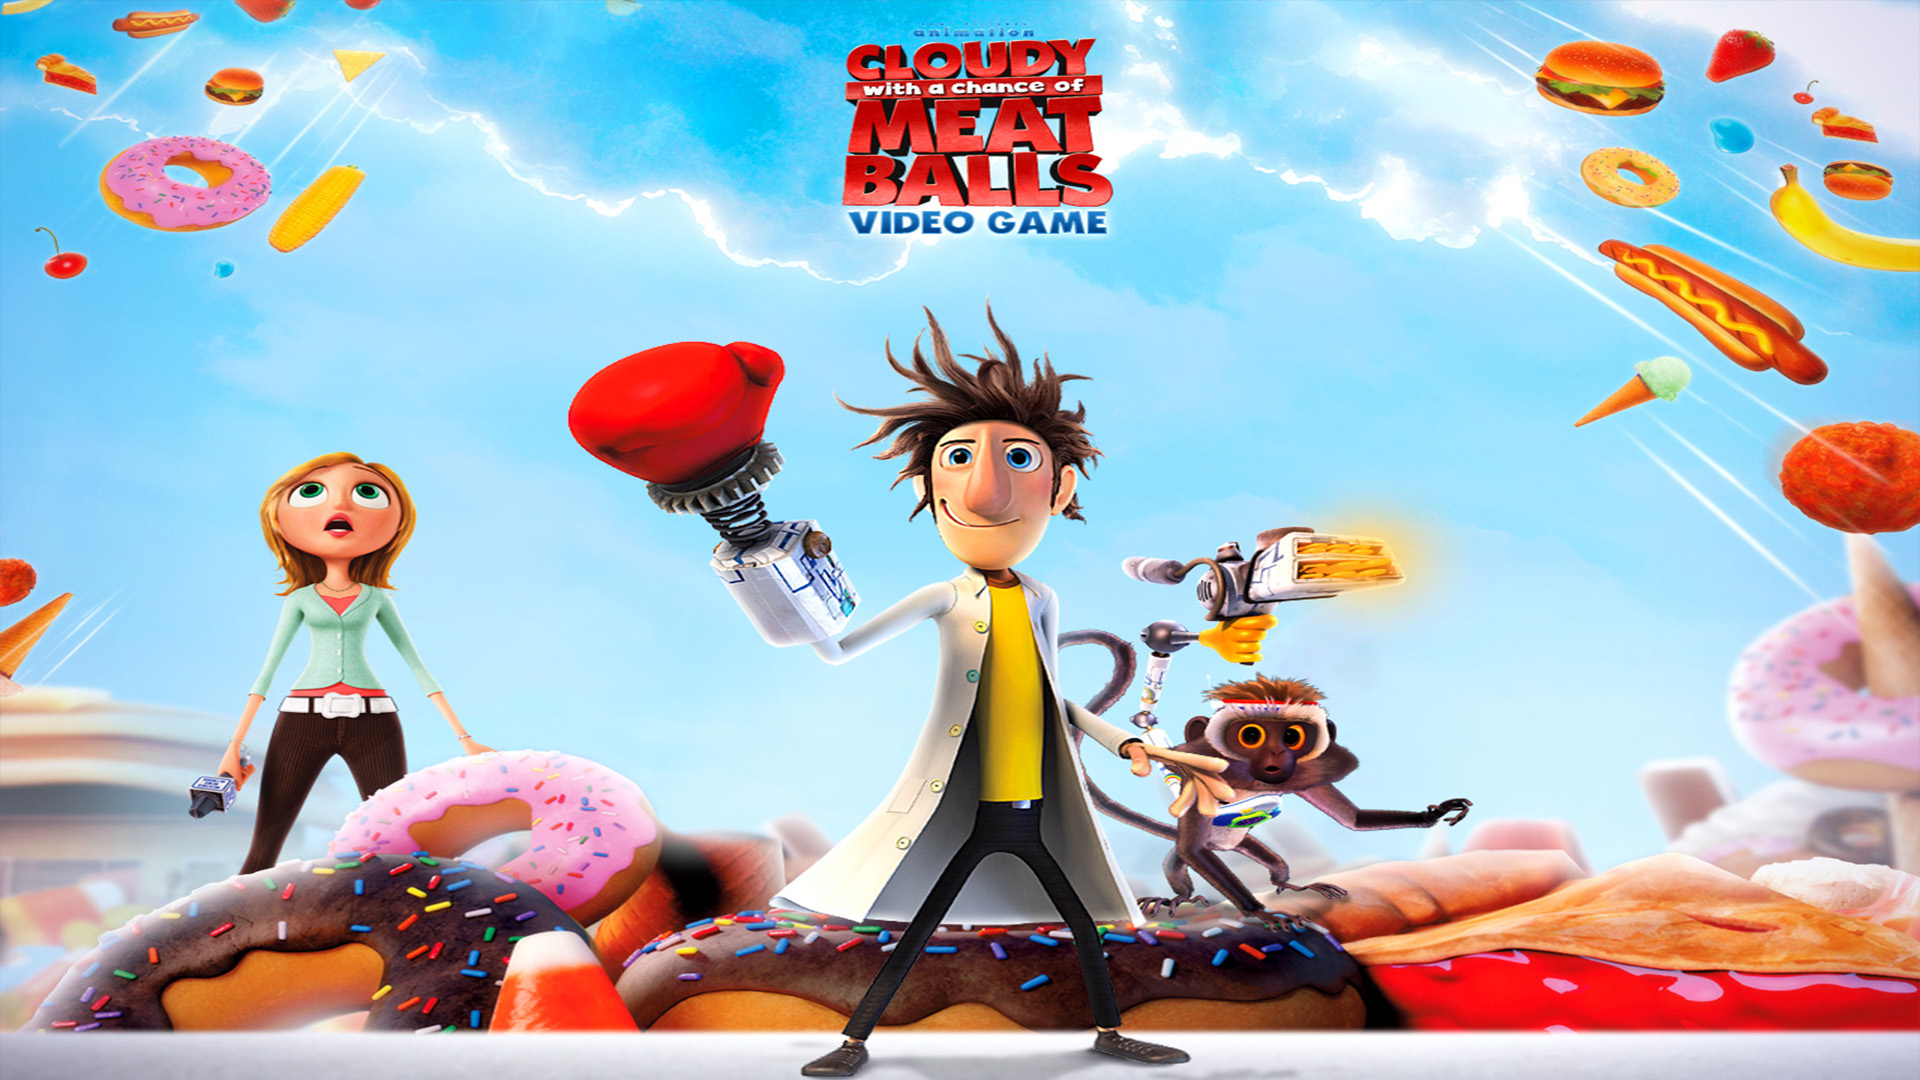 cloudy with a chance of meatballs, video game